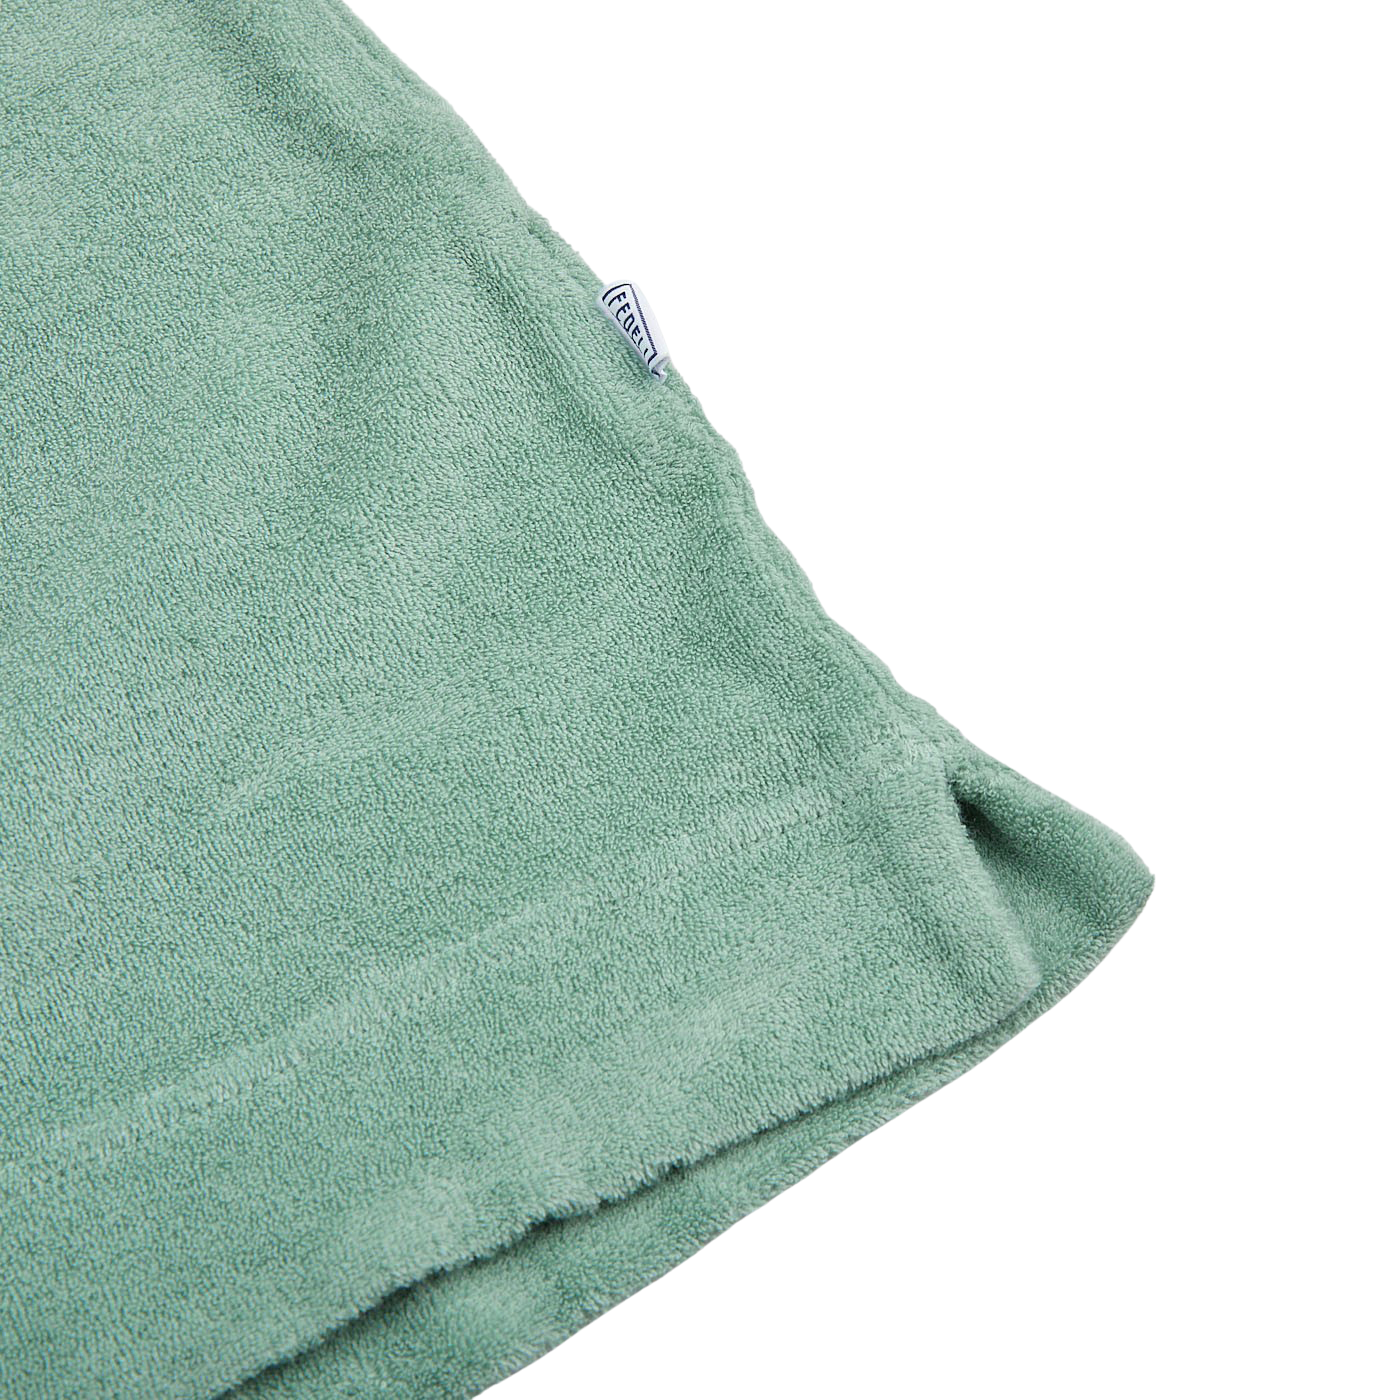 A close up of a Fedeli slim fit Light Green Cotton Toweling Shirt.